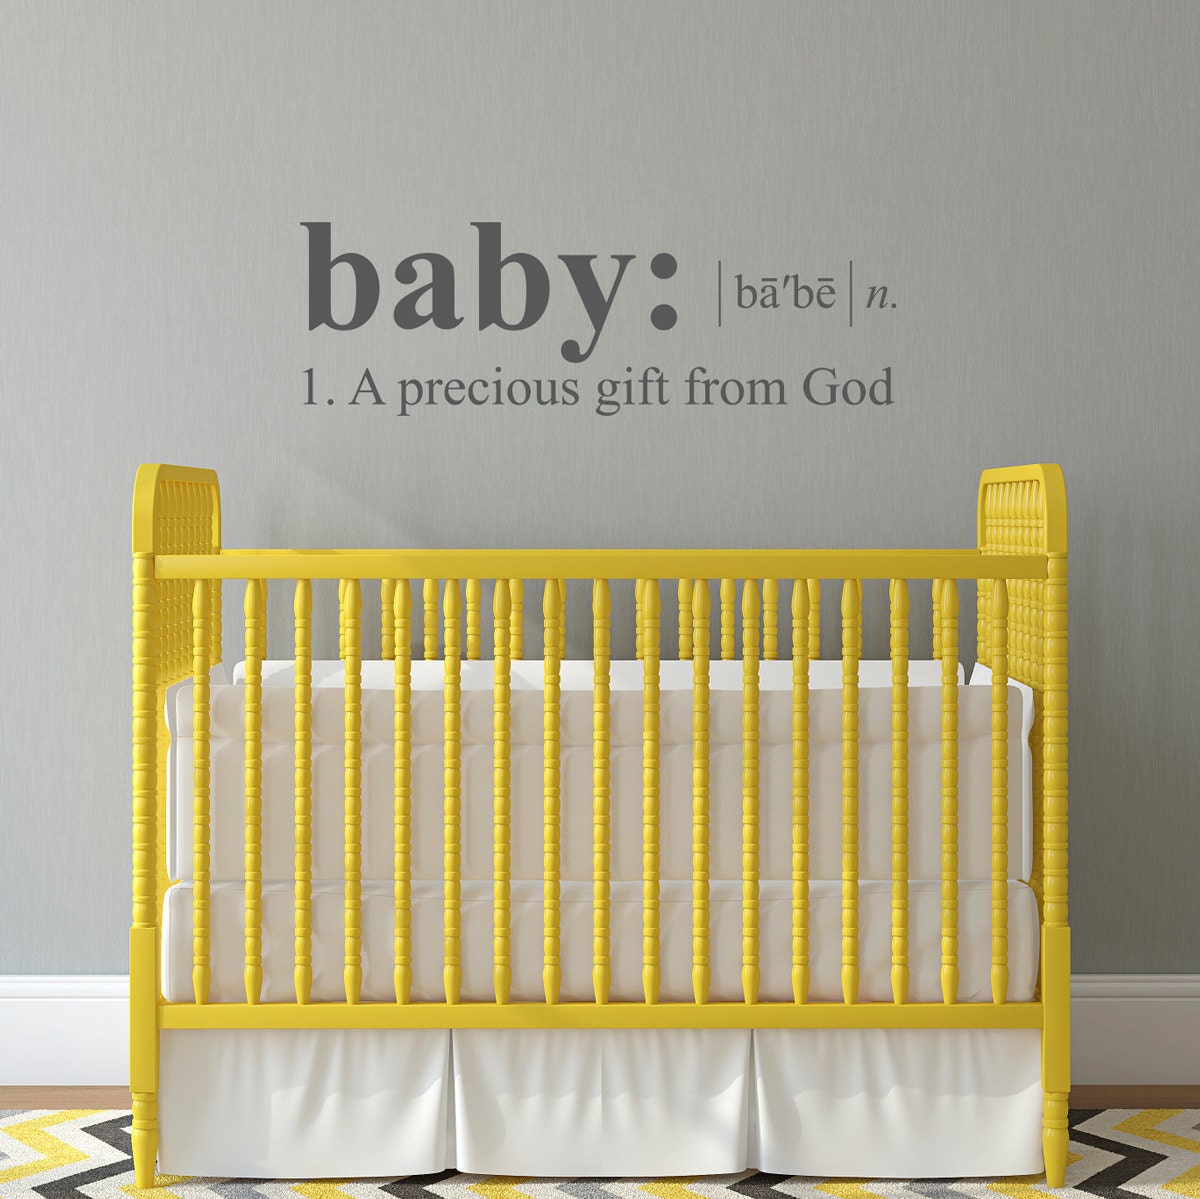 Nursery Wall Decal - Baby definition Decal - a precious gift from God